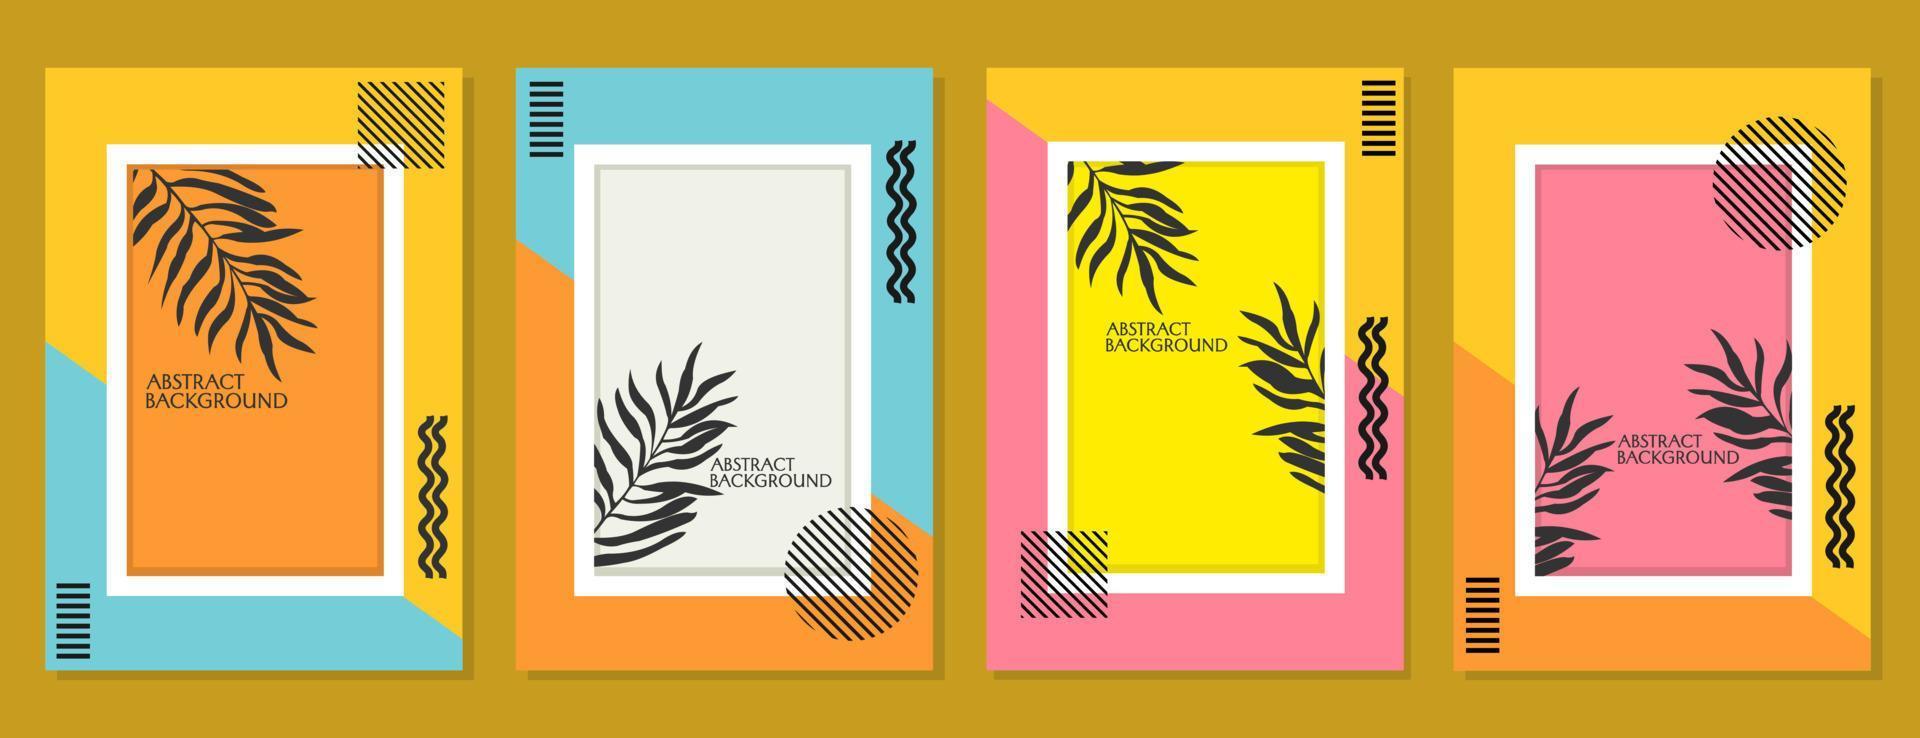 set of framed cover designs with palm leaf silhouette elements. pastel color aesthetic background design vector